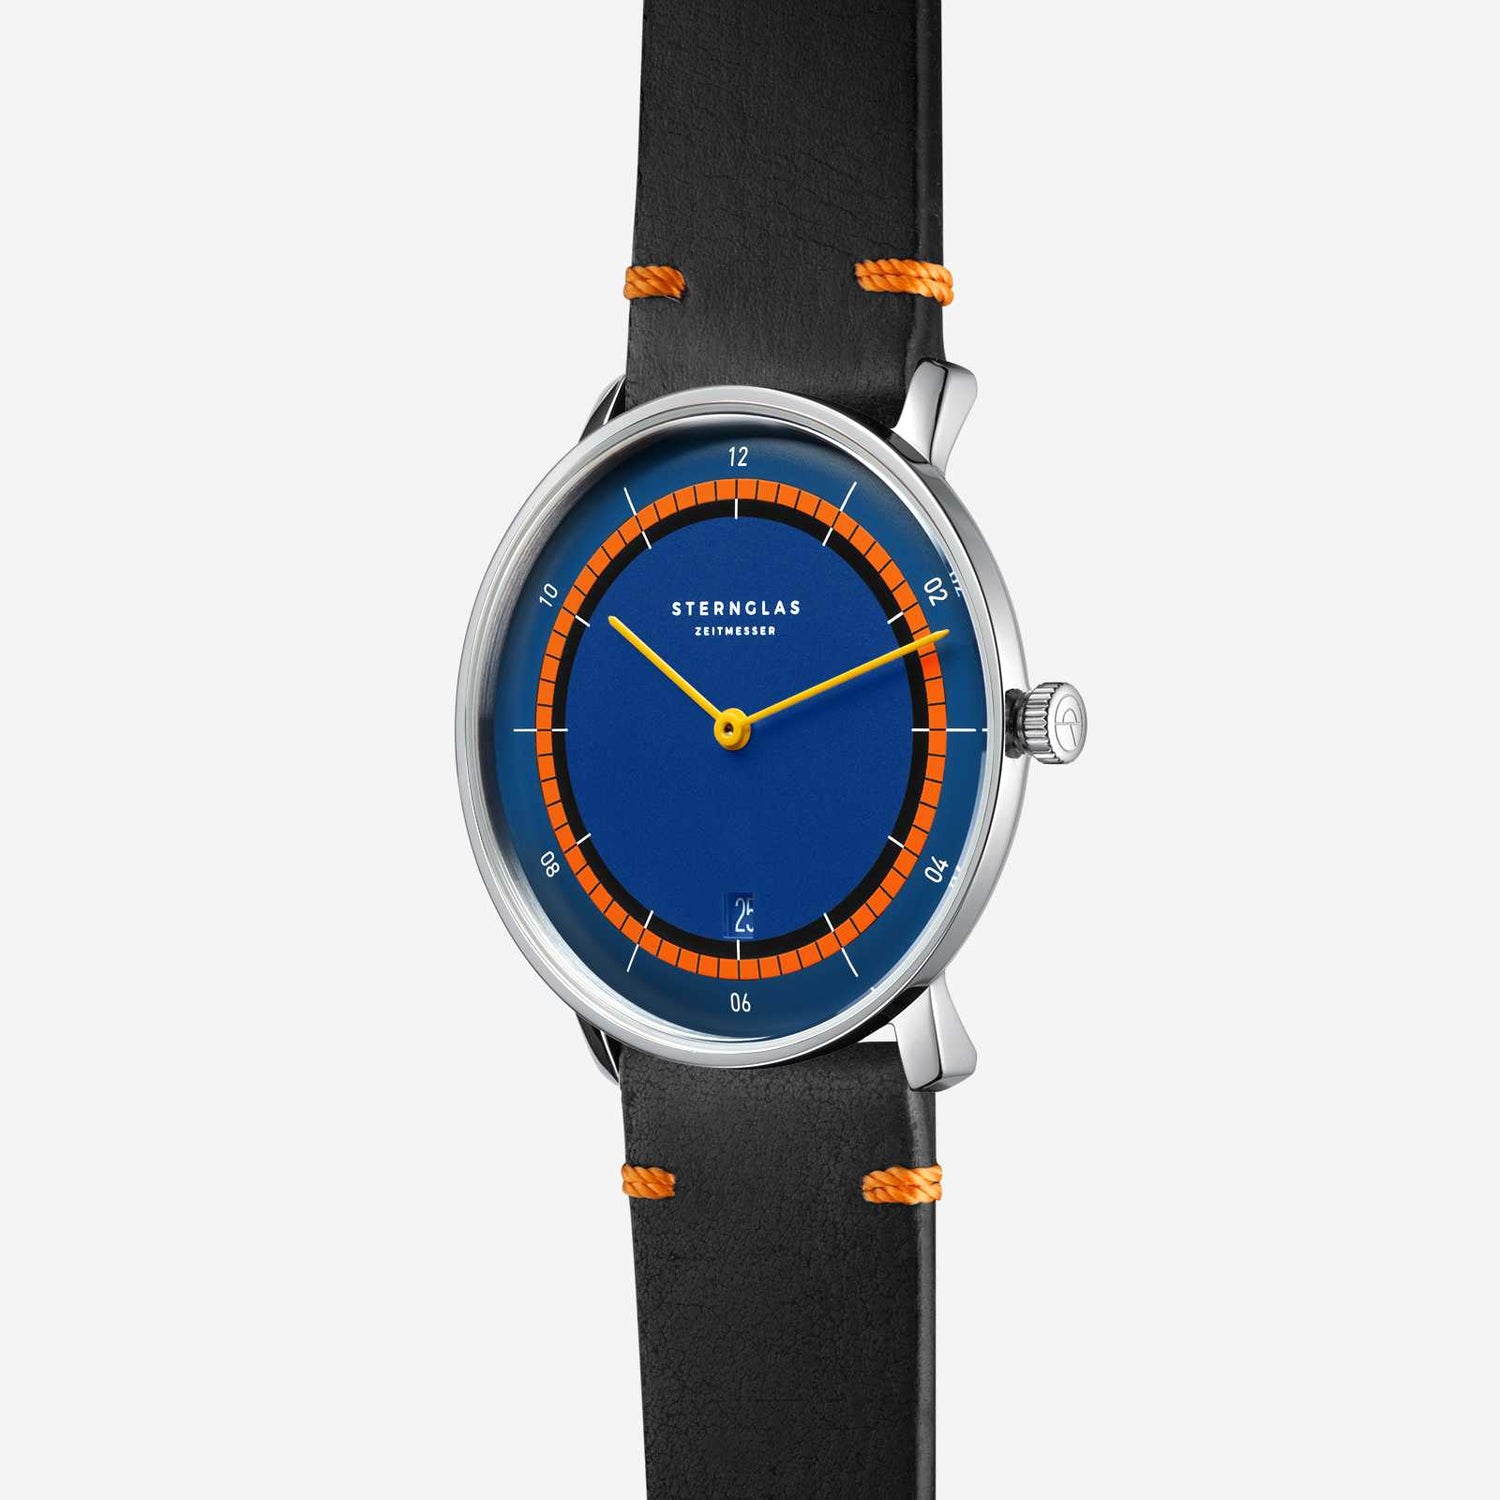 popup|Inspired by the coast|The blue-orange dial gives the model a sophisticated character.